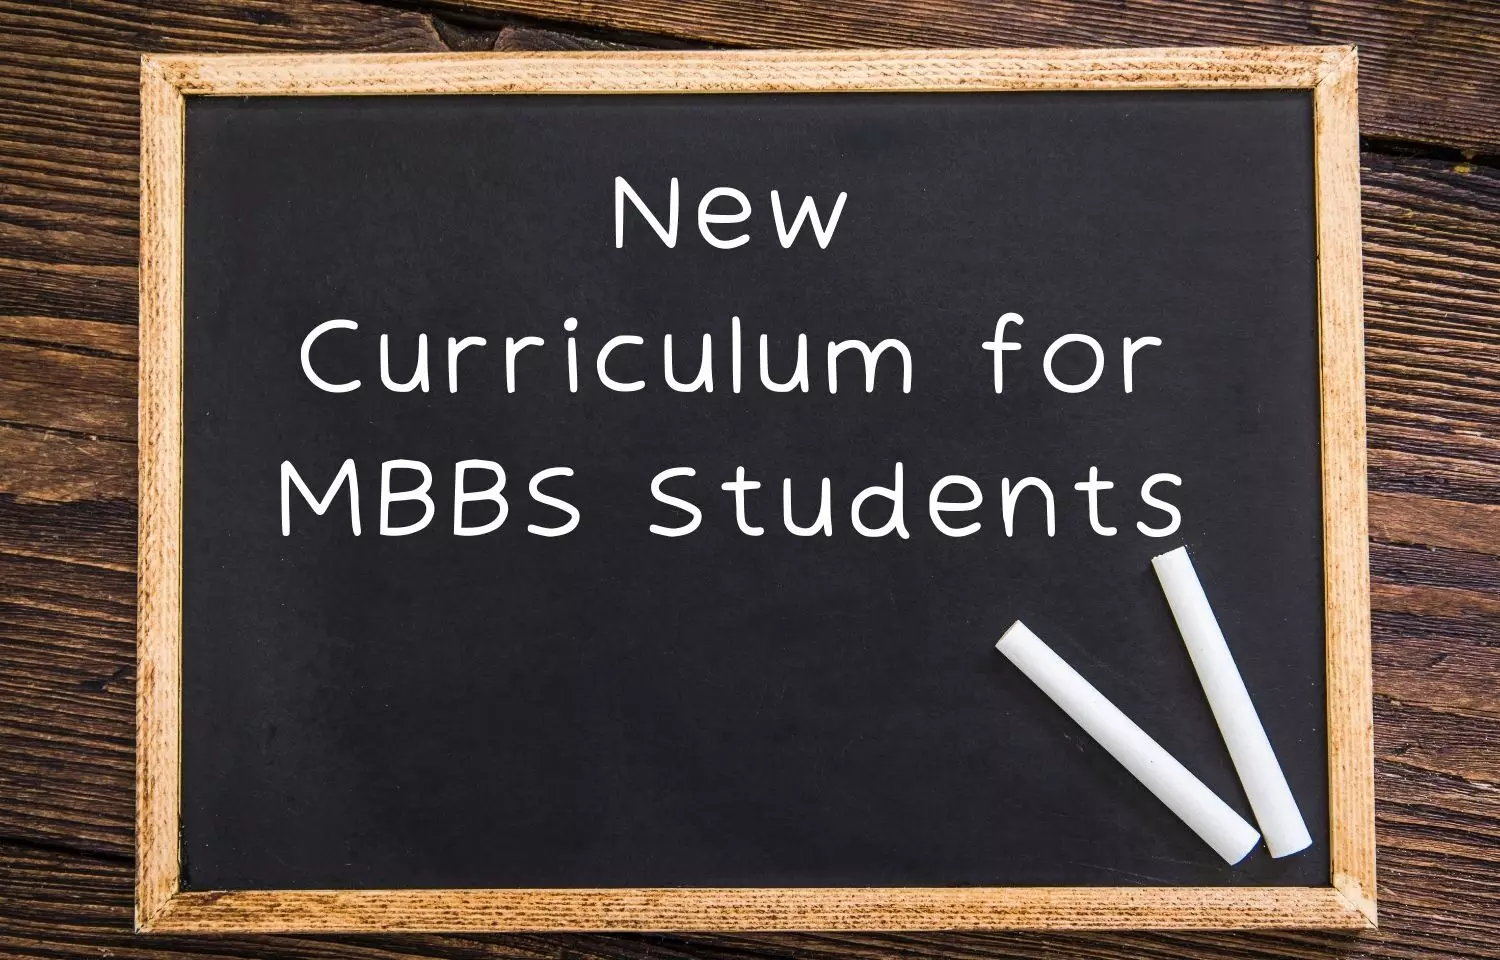 Competency Based Medical Education for MBBS - NMC issues new course curriculum, details